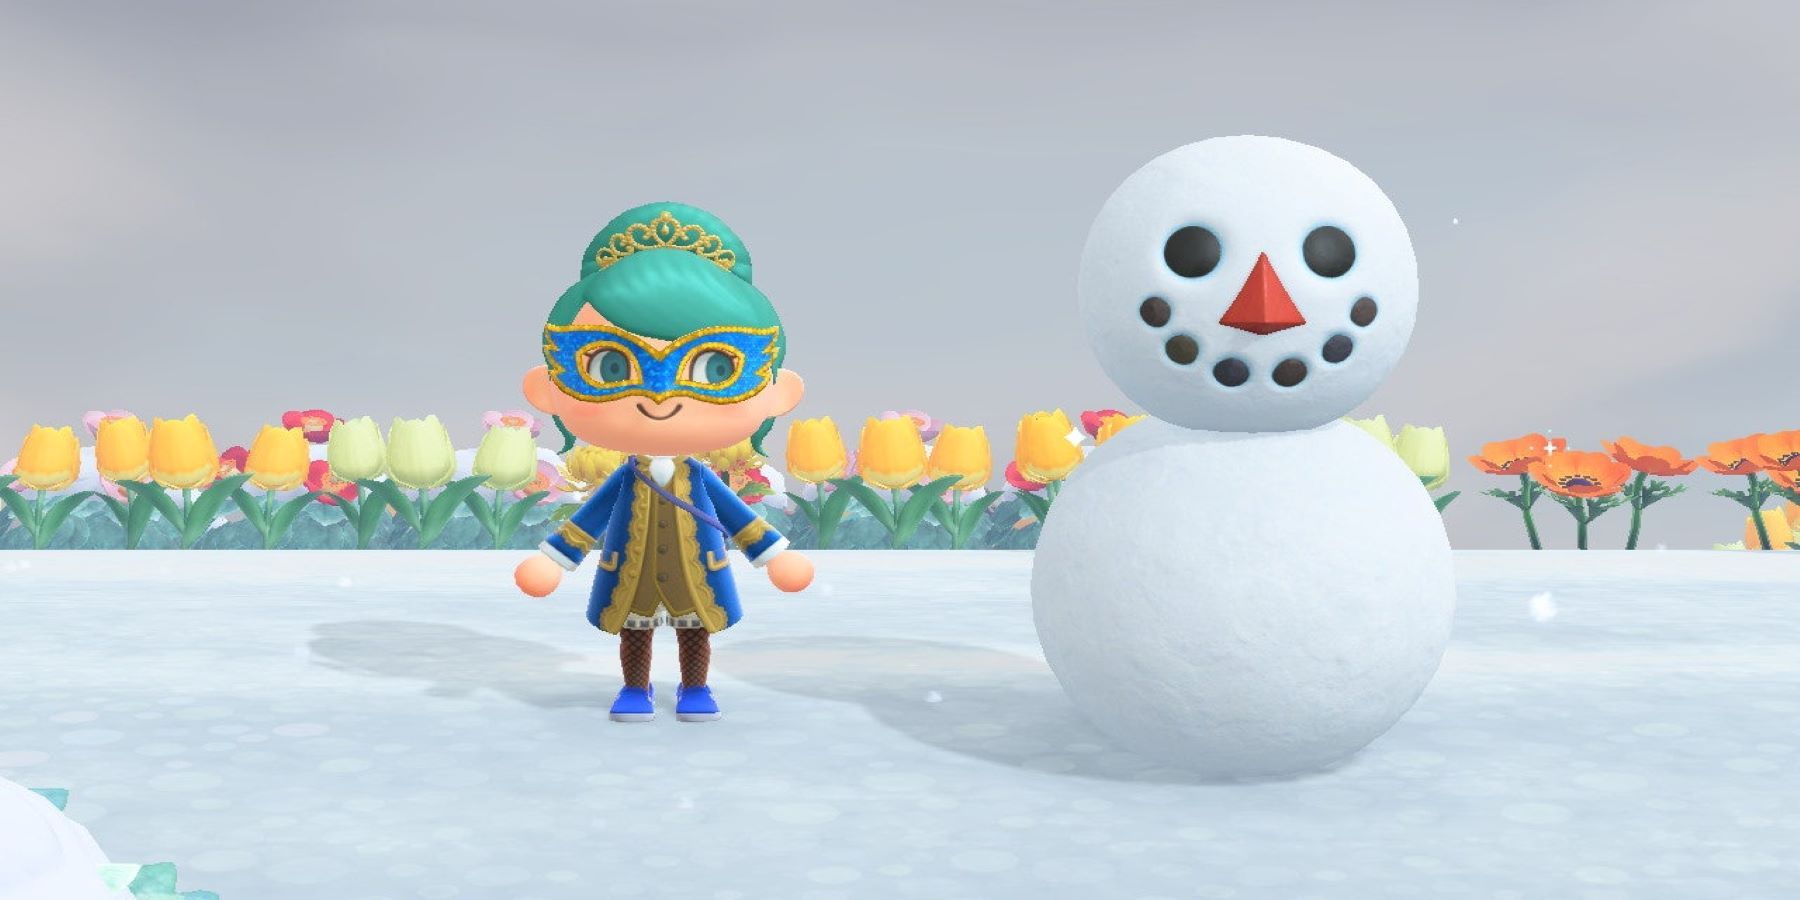 animal crossing snowboy and villager